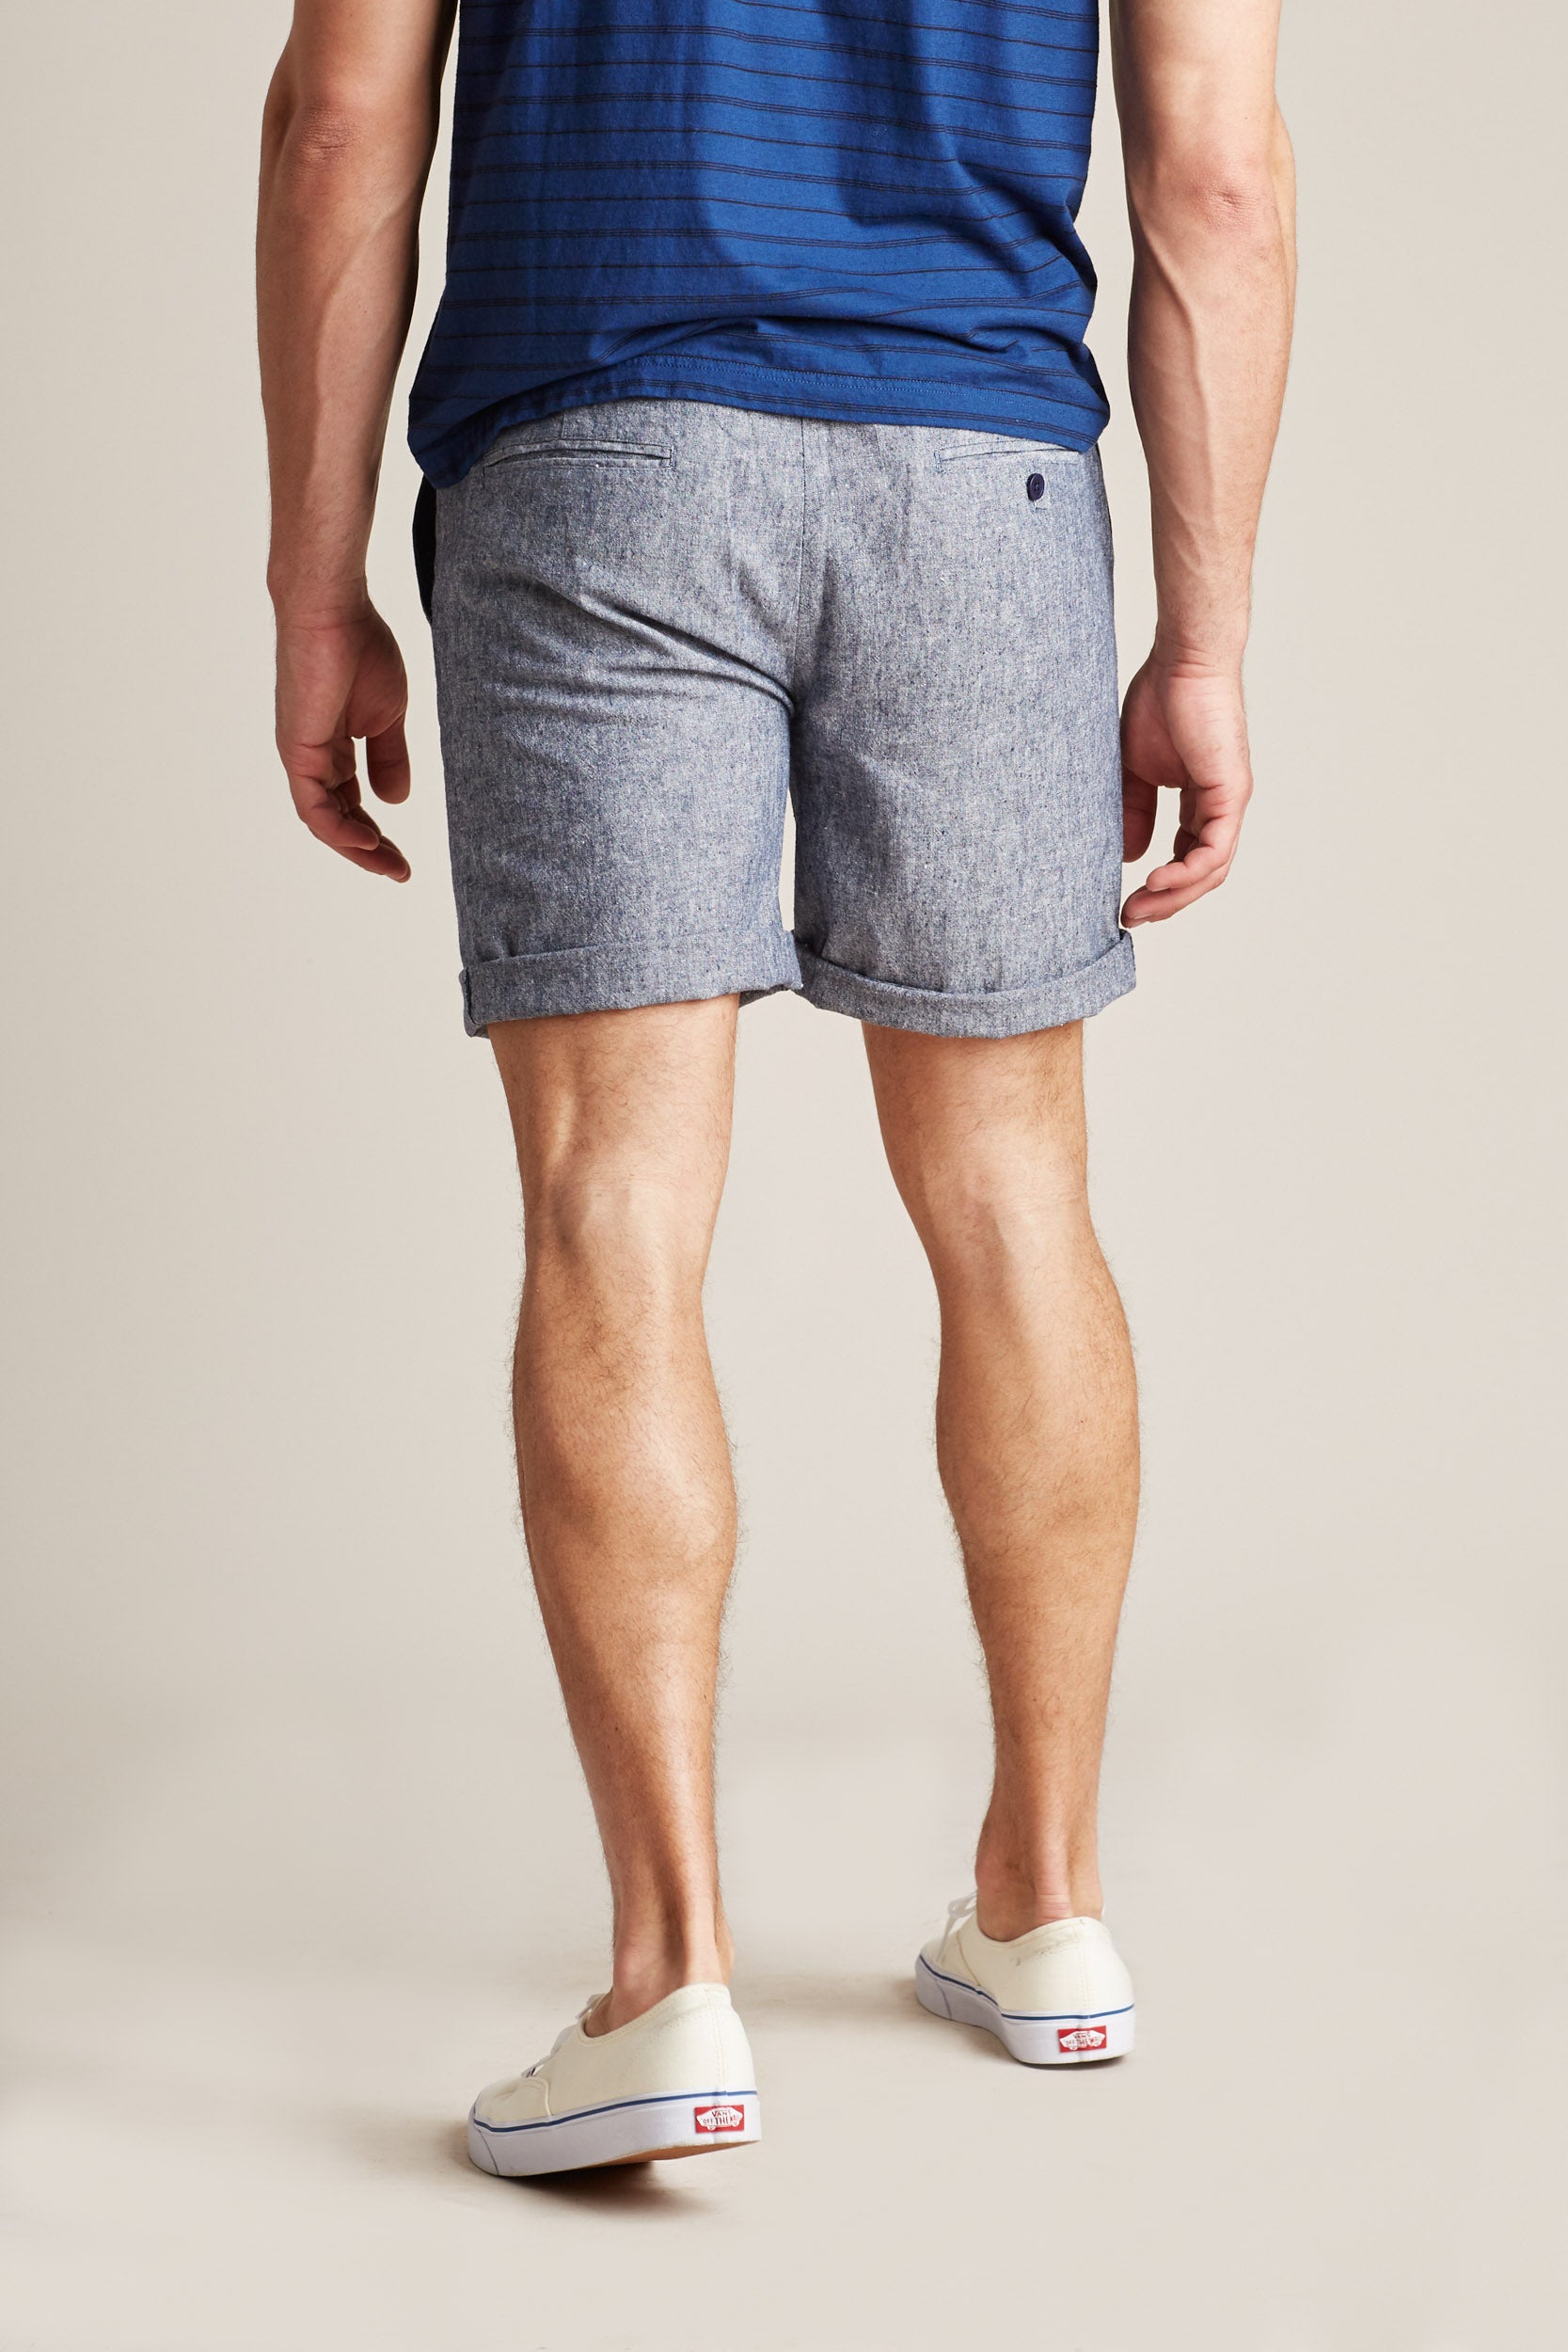 Selby Short